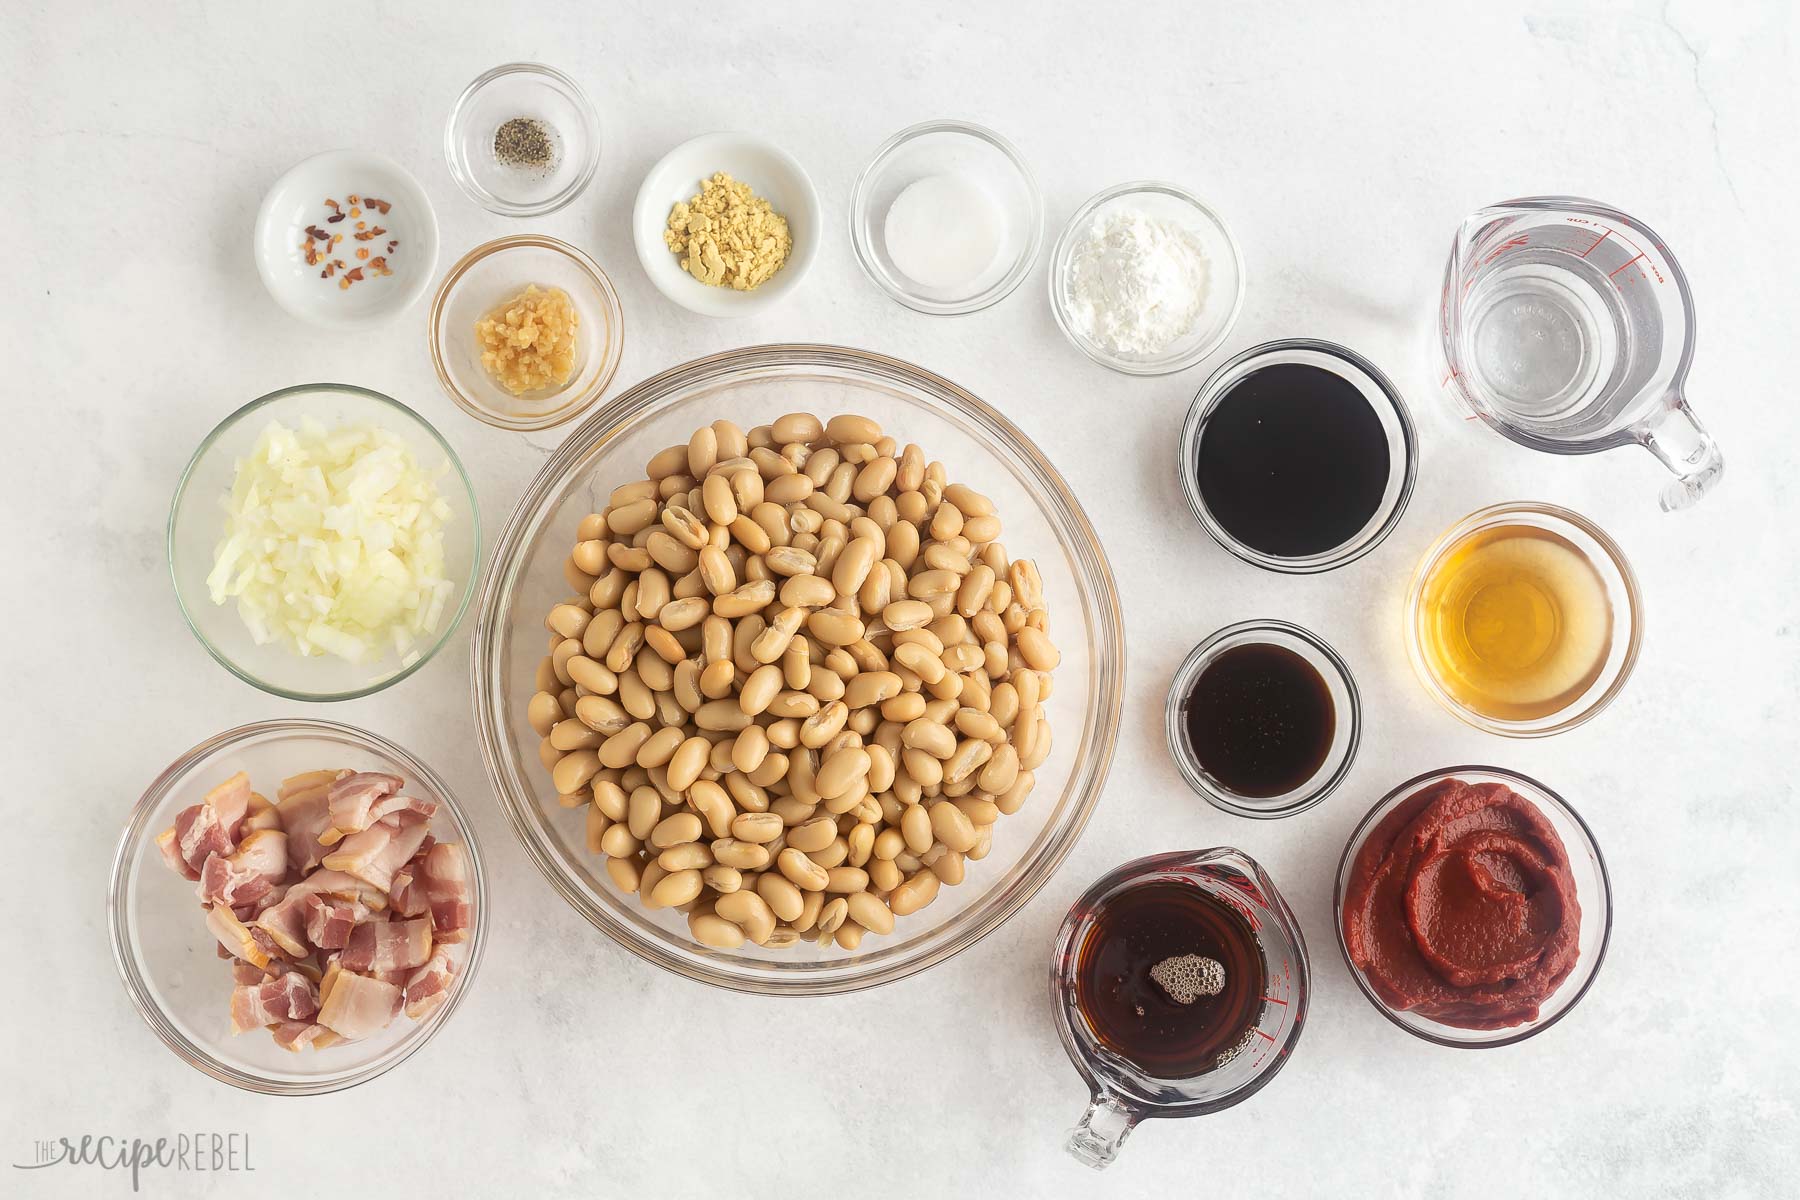 ingredients needed for maple bacon baked beans on white background.